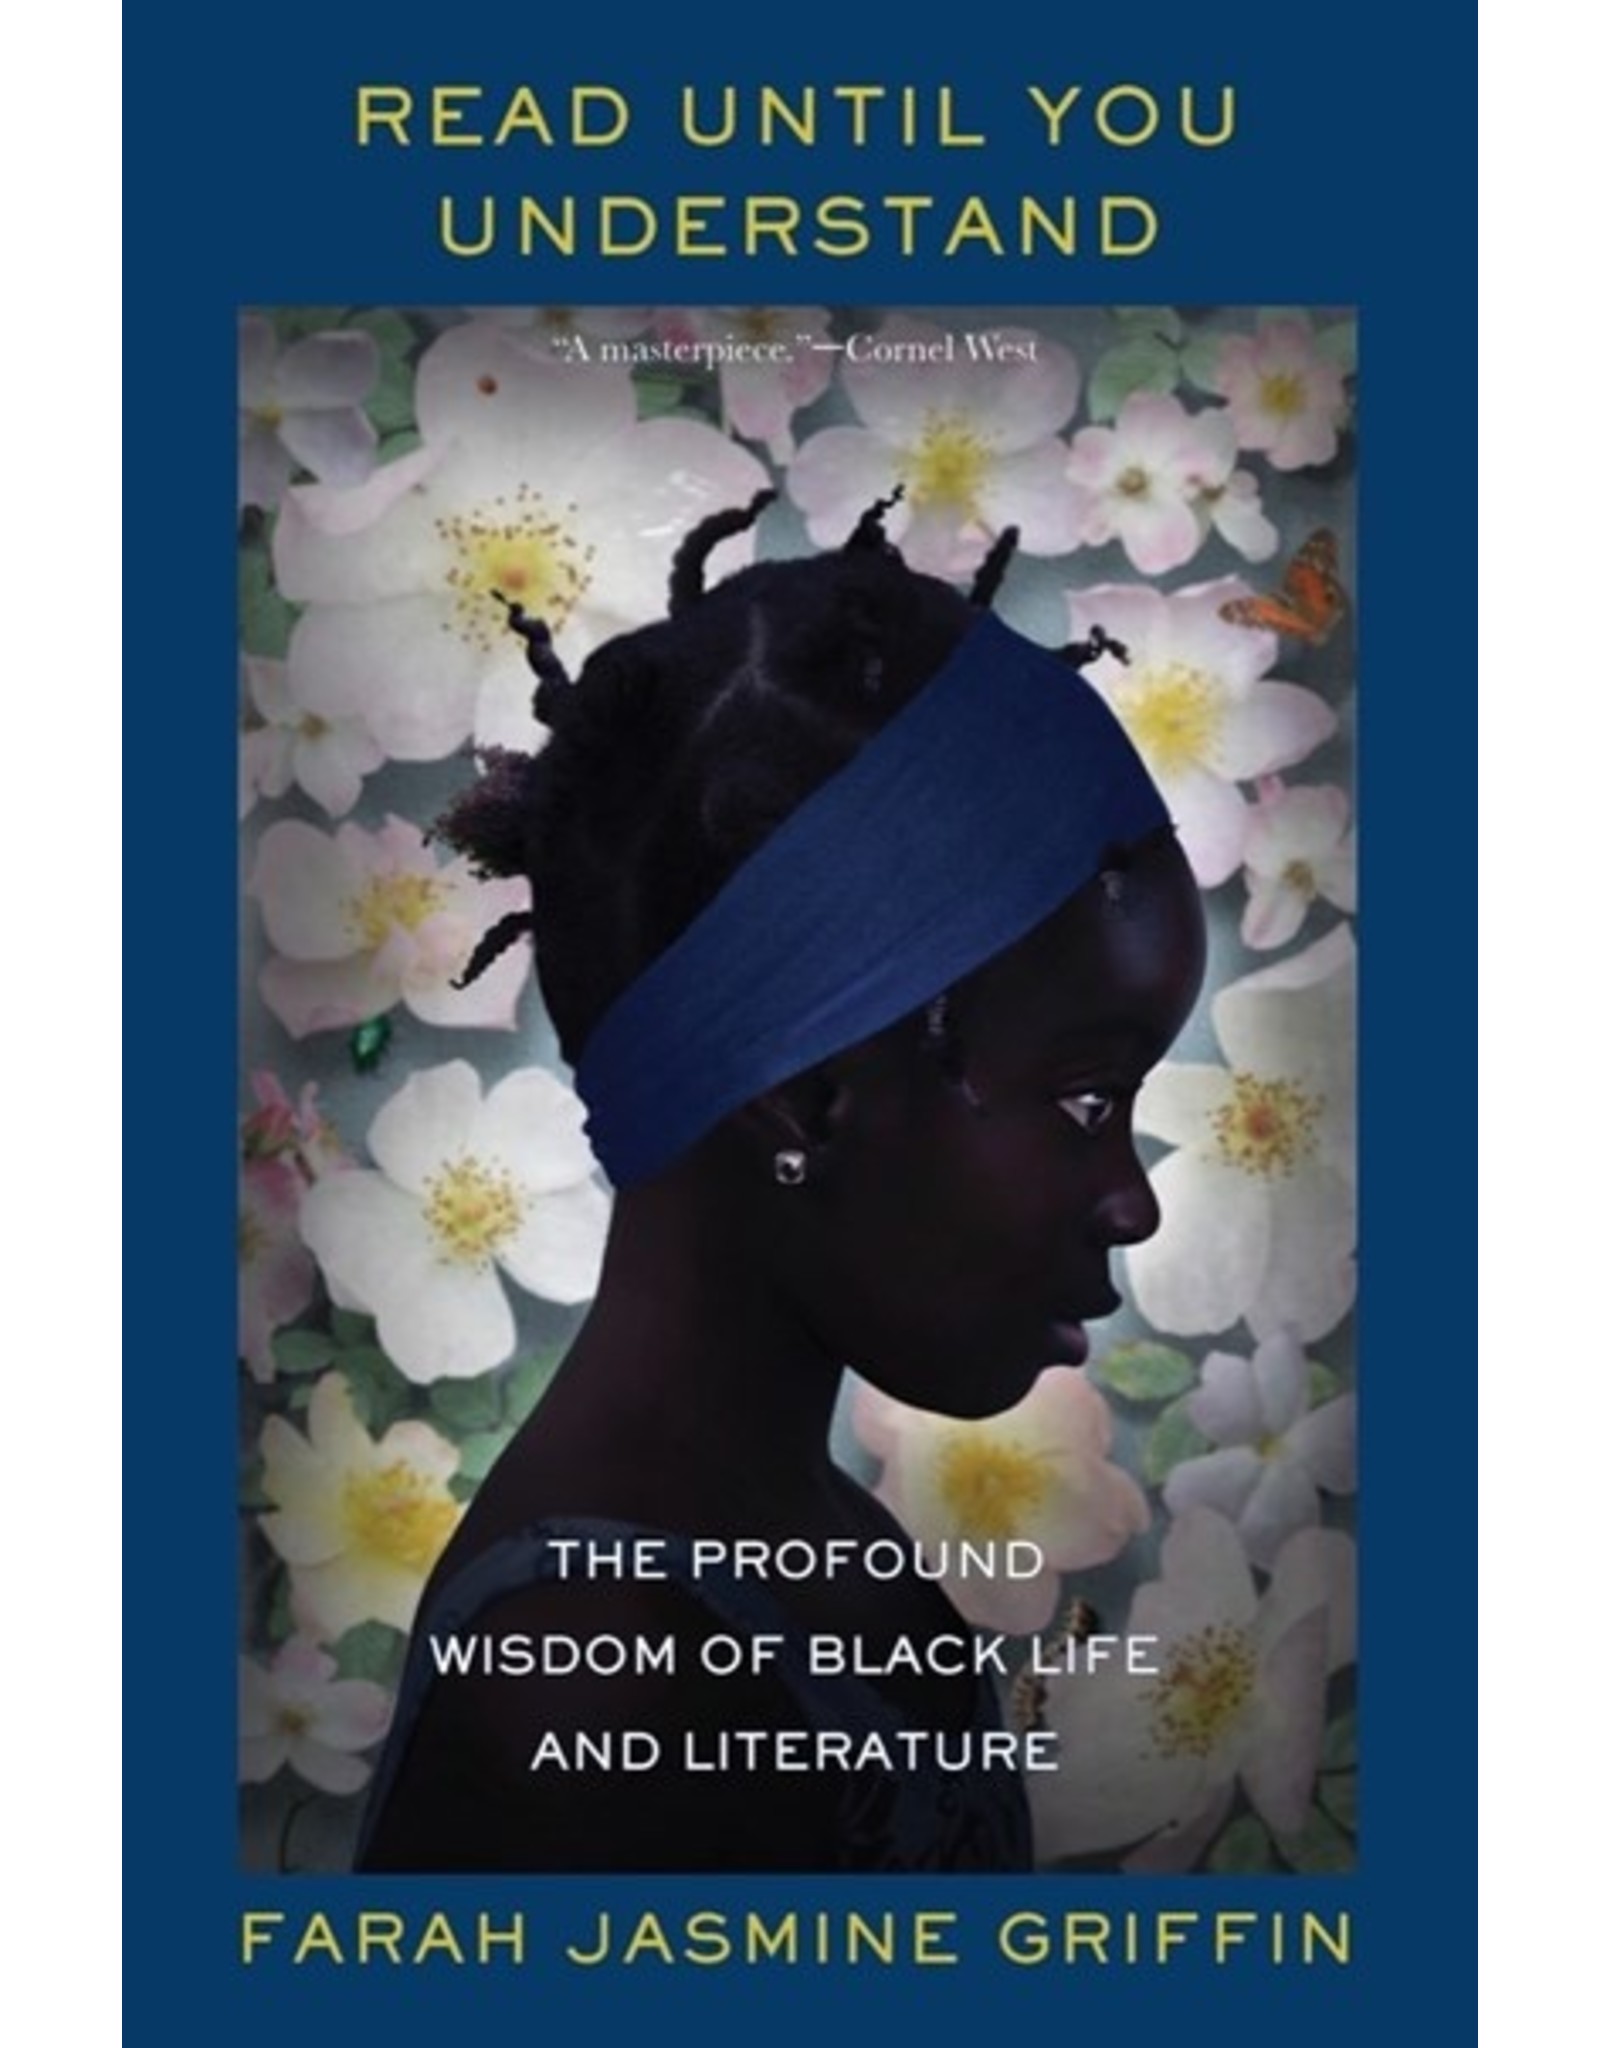 Books Read Until You Understand : The Profound Wisdom of Black Life and Literature by Farah Jasmine Griffin